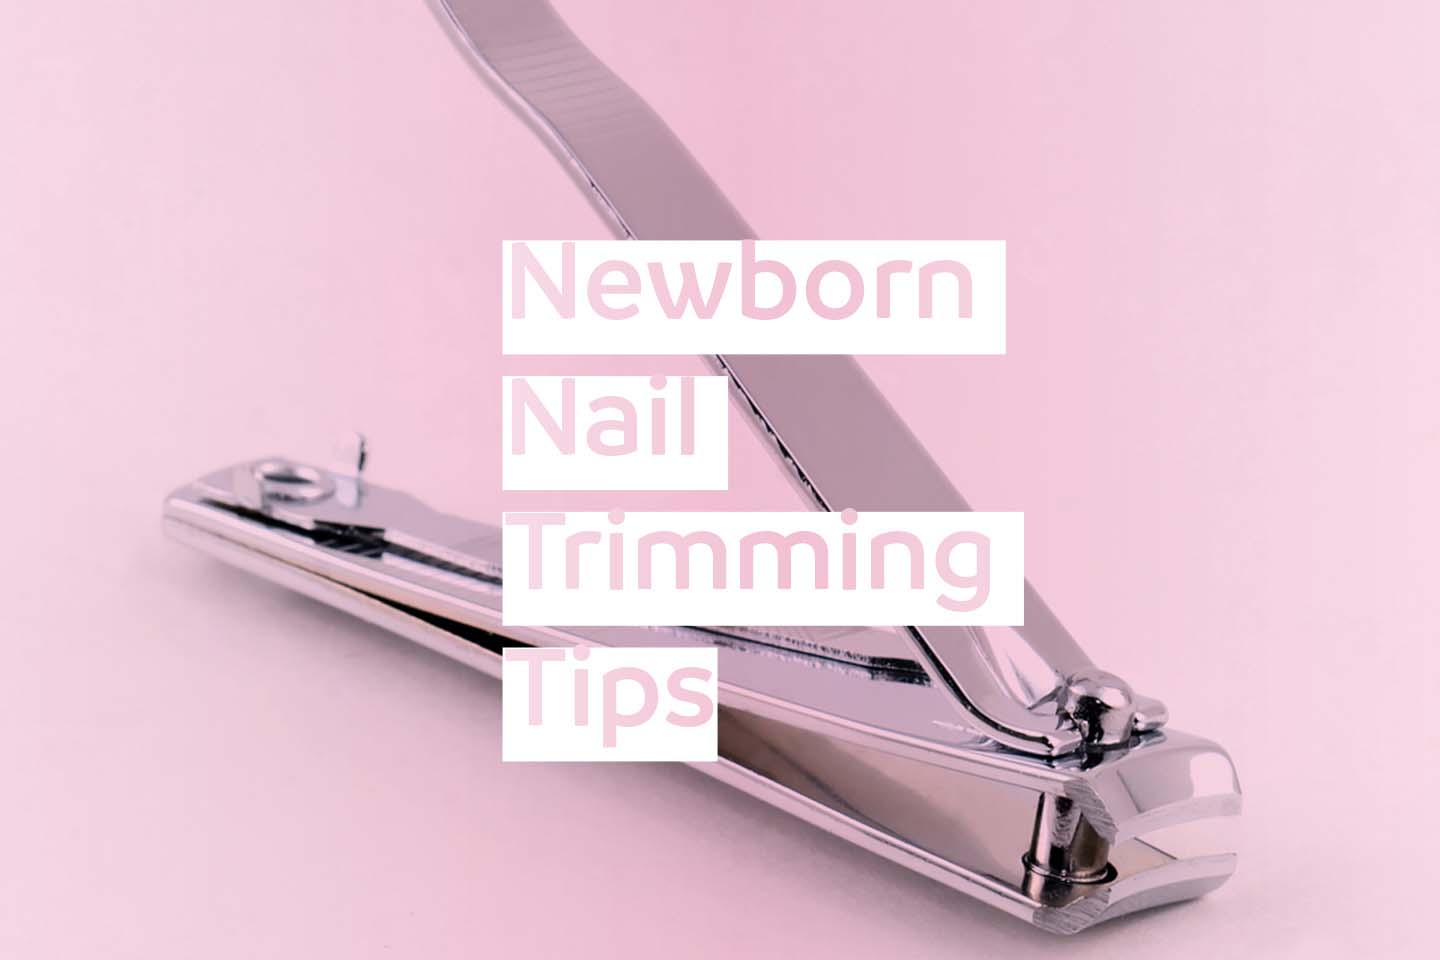 newborn nail trimming tips nail clippers pink tint chattanooga